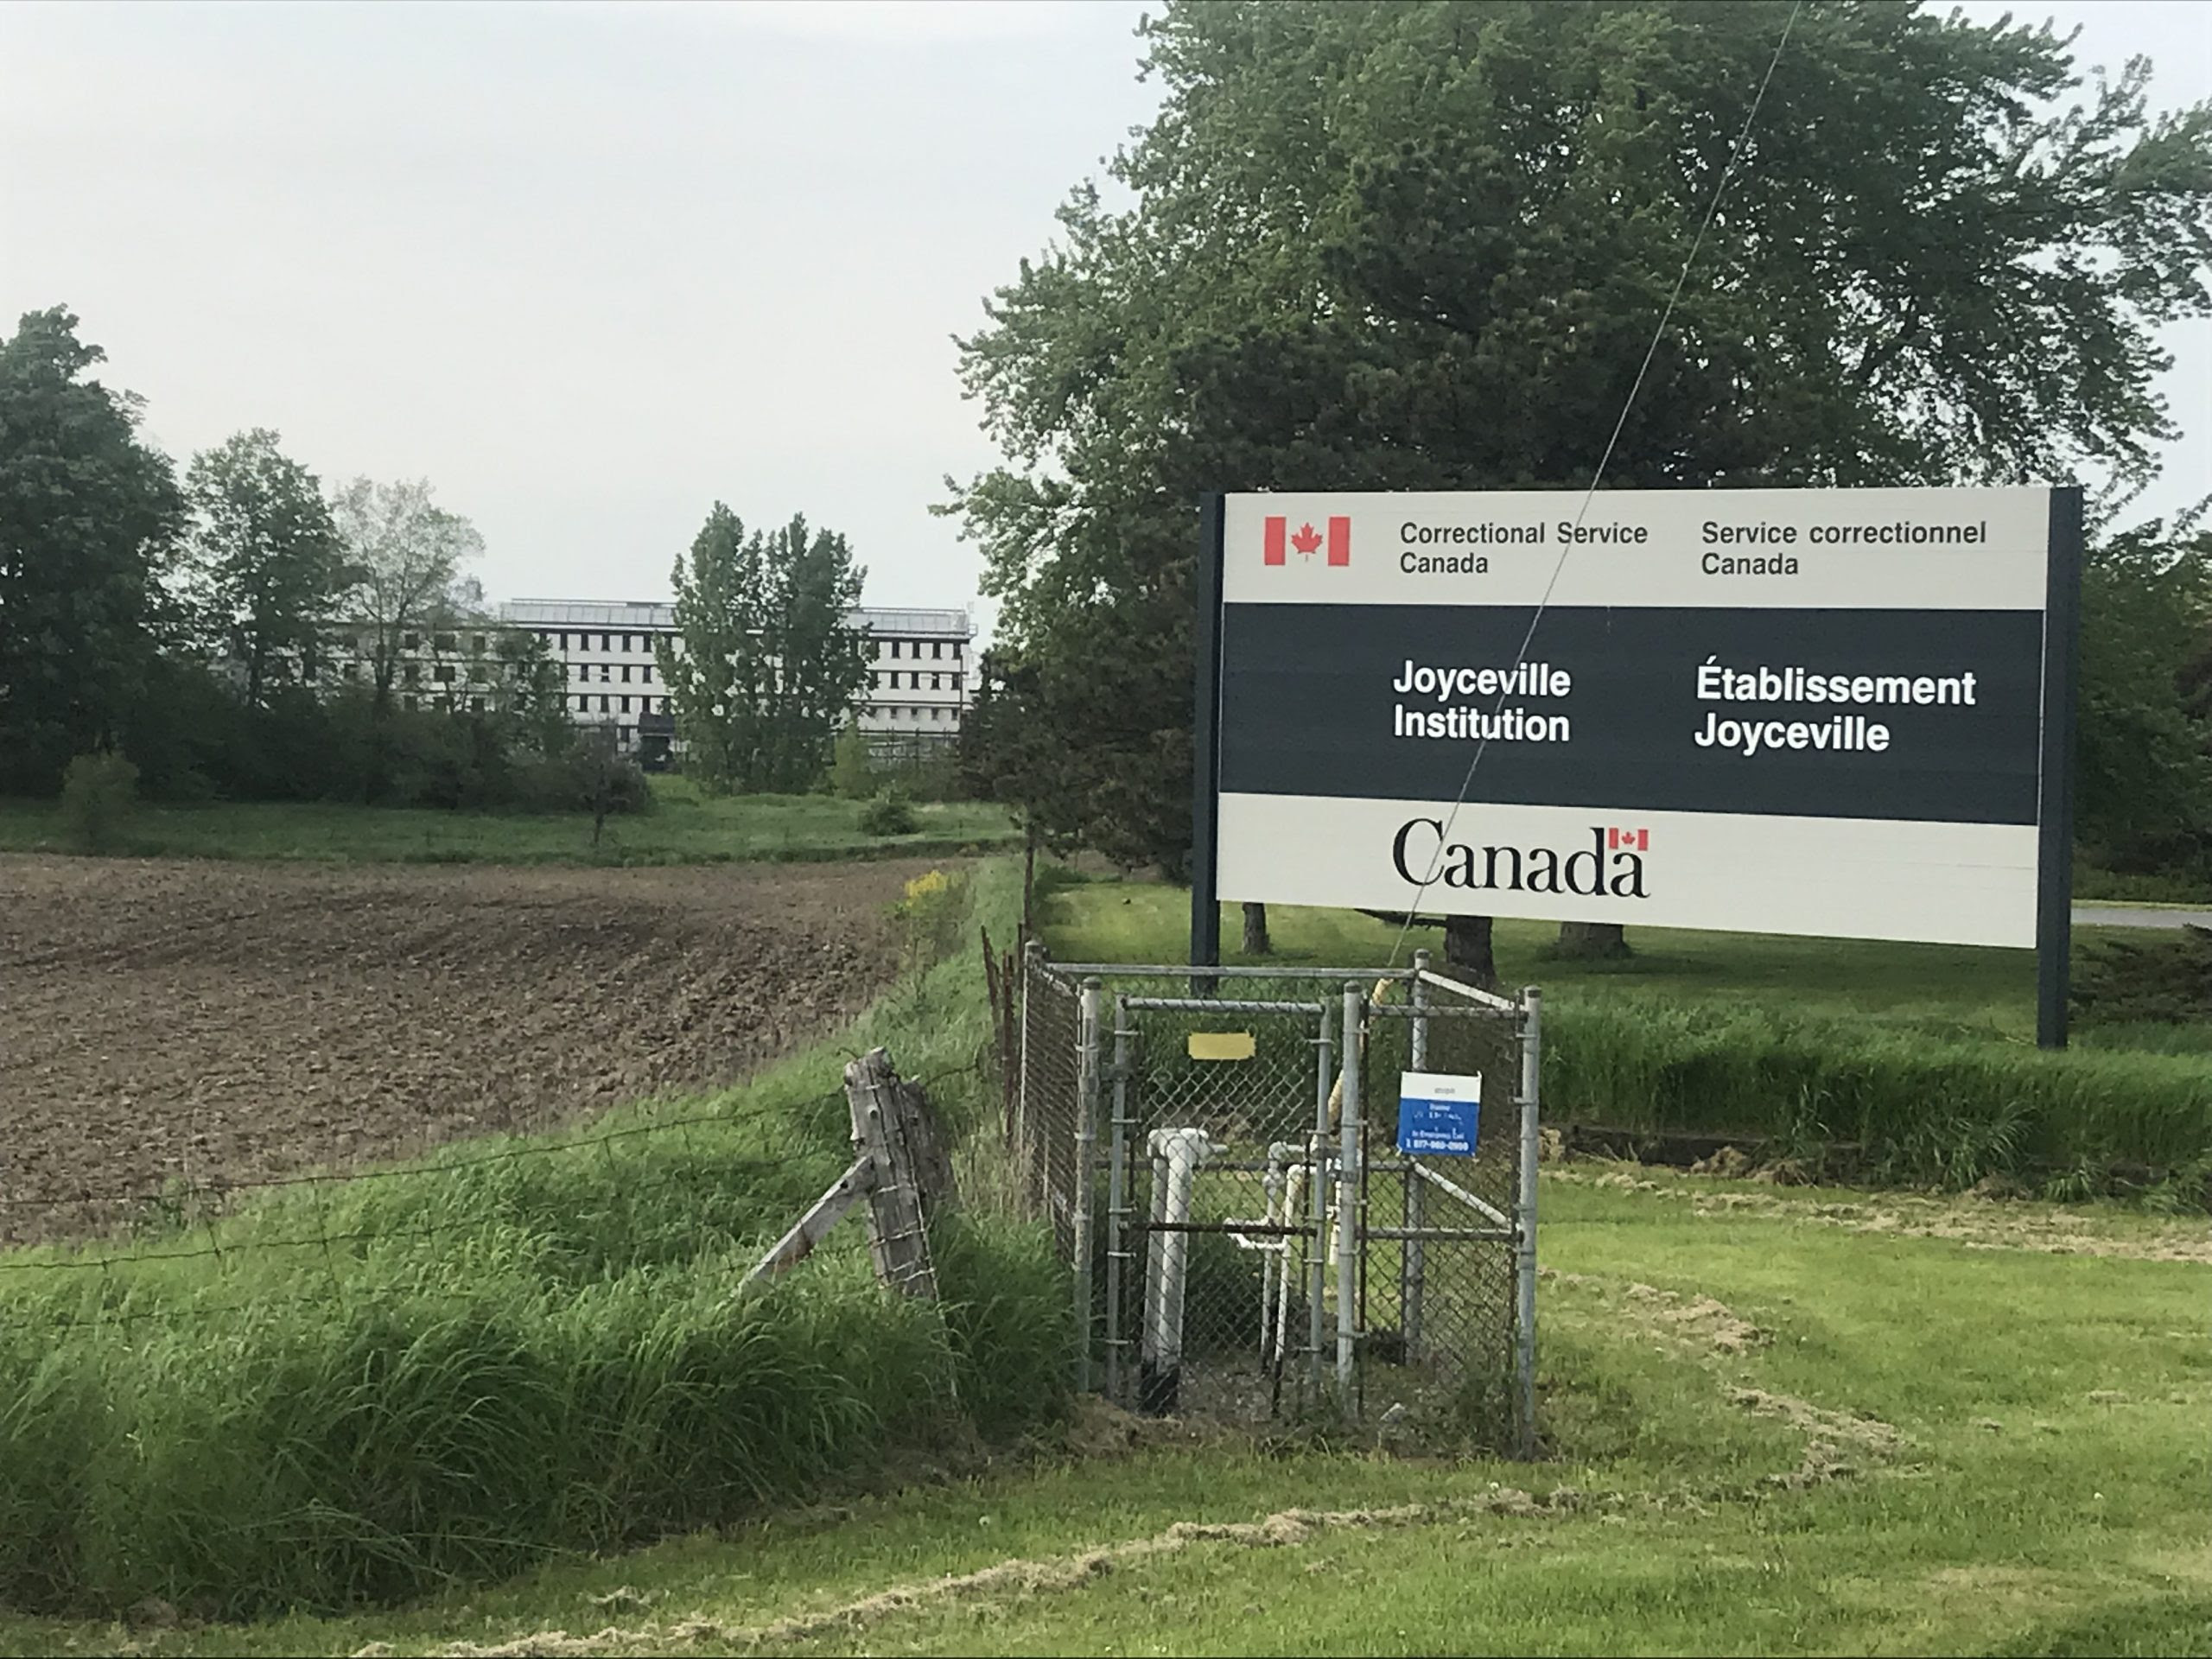 Routine search reveals drugs, cell phones at Joyceville Institution – Kingston News